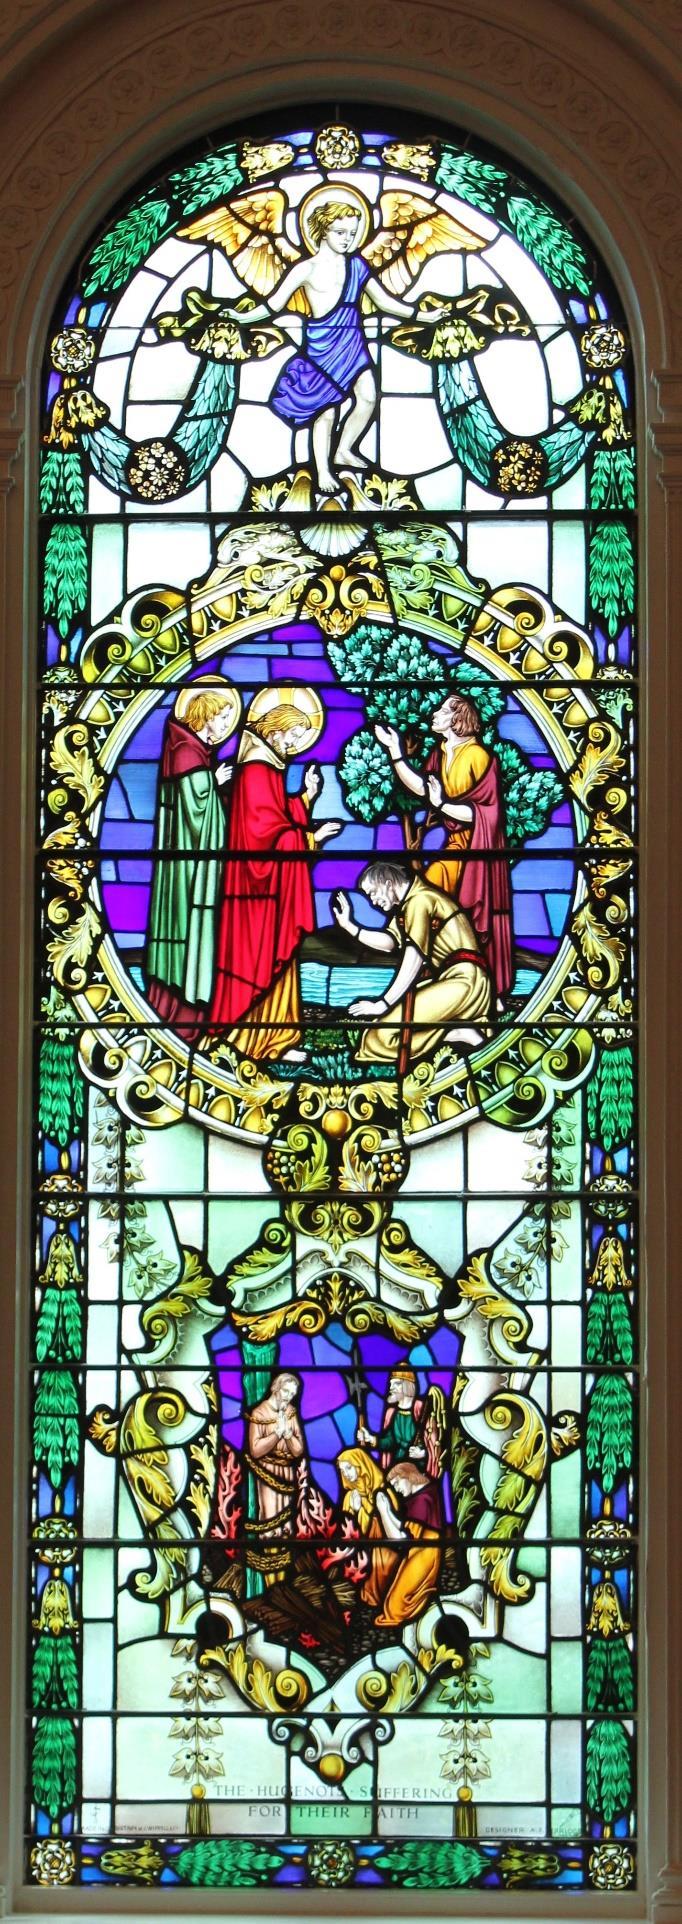 (Last Window on right side facing Chancel) Upper Medallion: Christ Healing the Blind Man Mark 10:52 Lower Medallion: The Huguenots The French Huguenots came to this